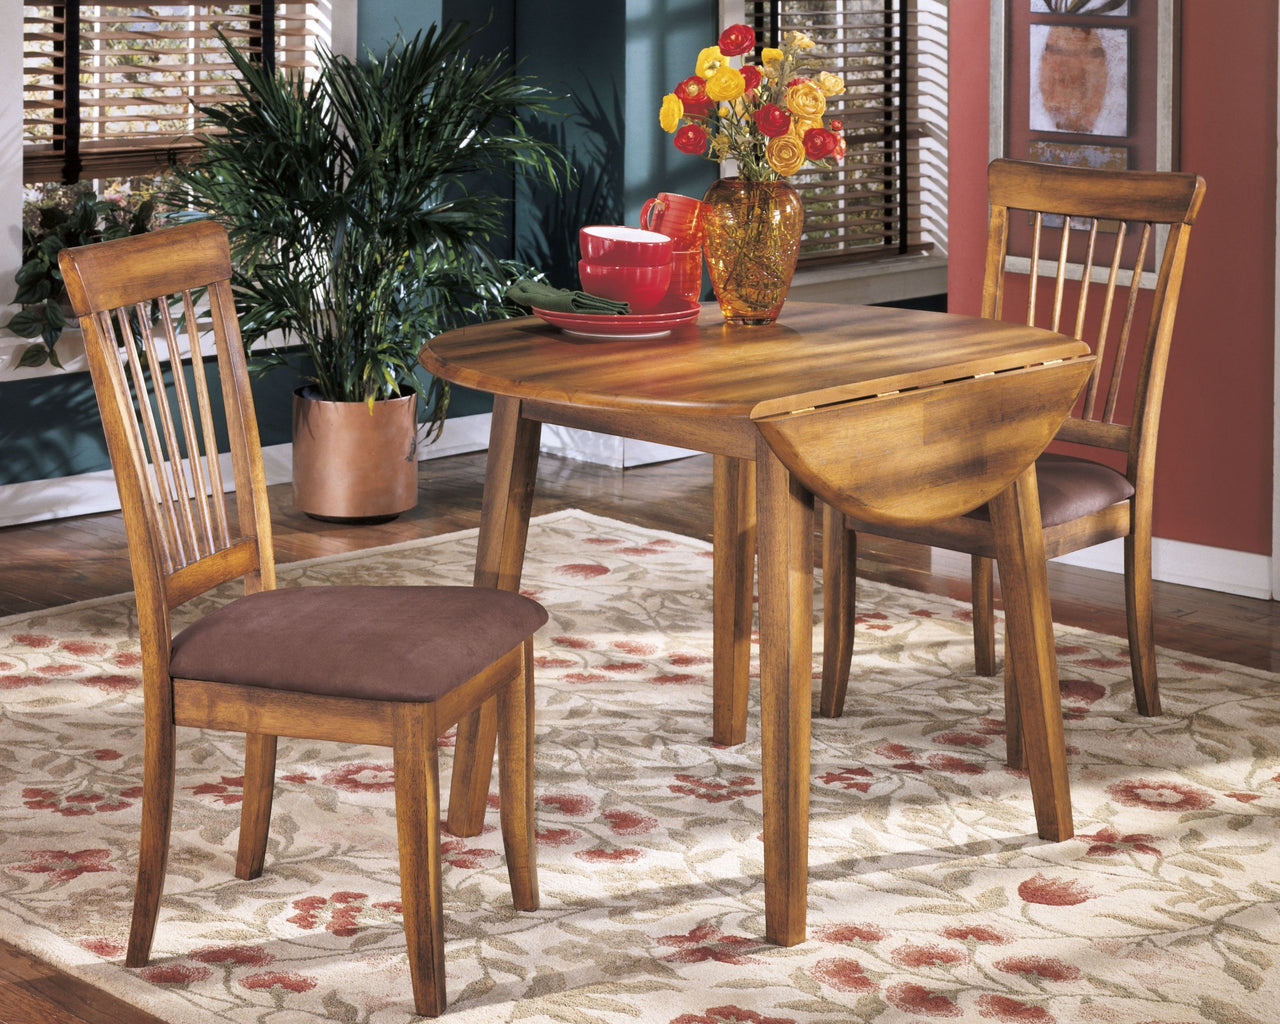 Berringer - Rustic Brown - Round Drm Drop Leaf Table - Tony's Home Furnishings